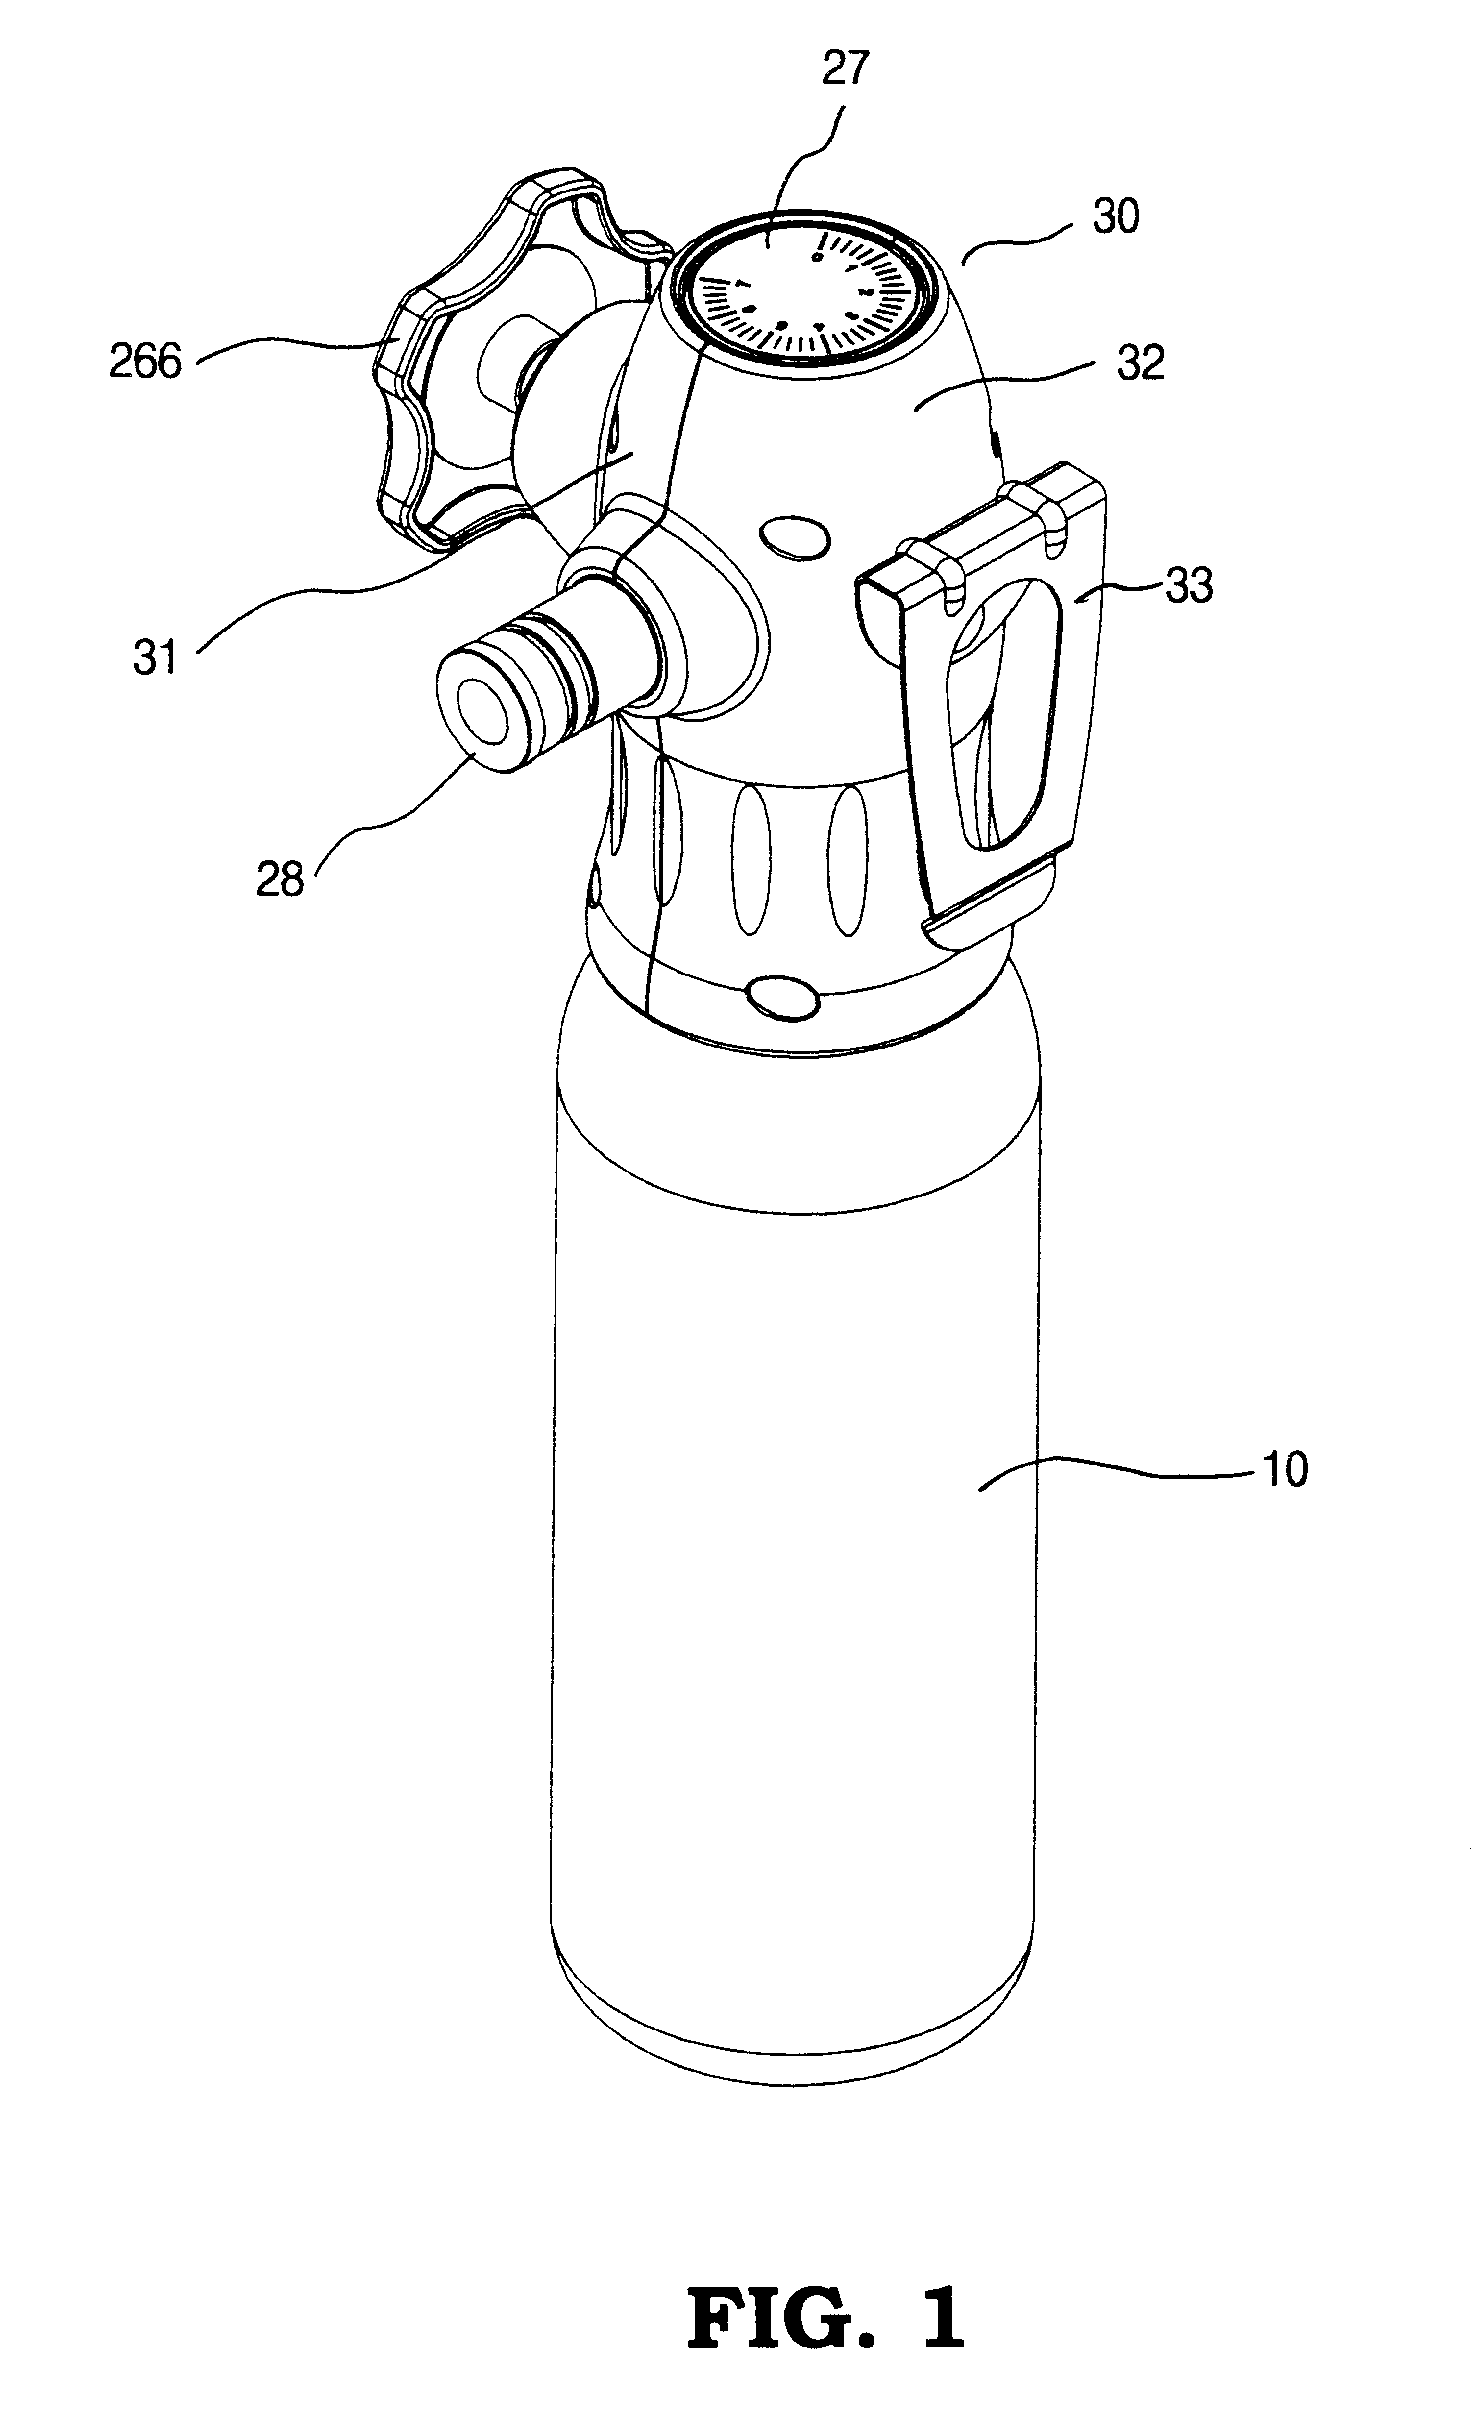 Portable device for supplying compressed CO2 from a pressure vessel to a pneumatic tool